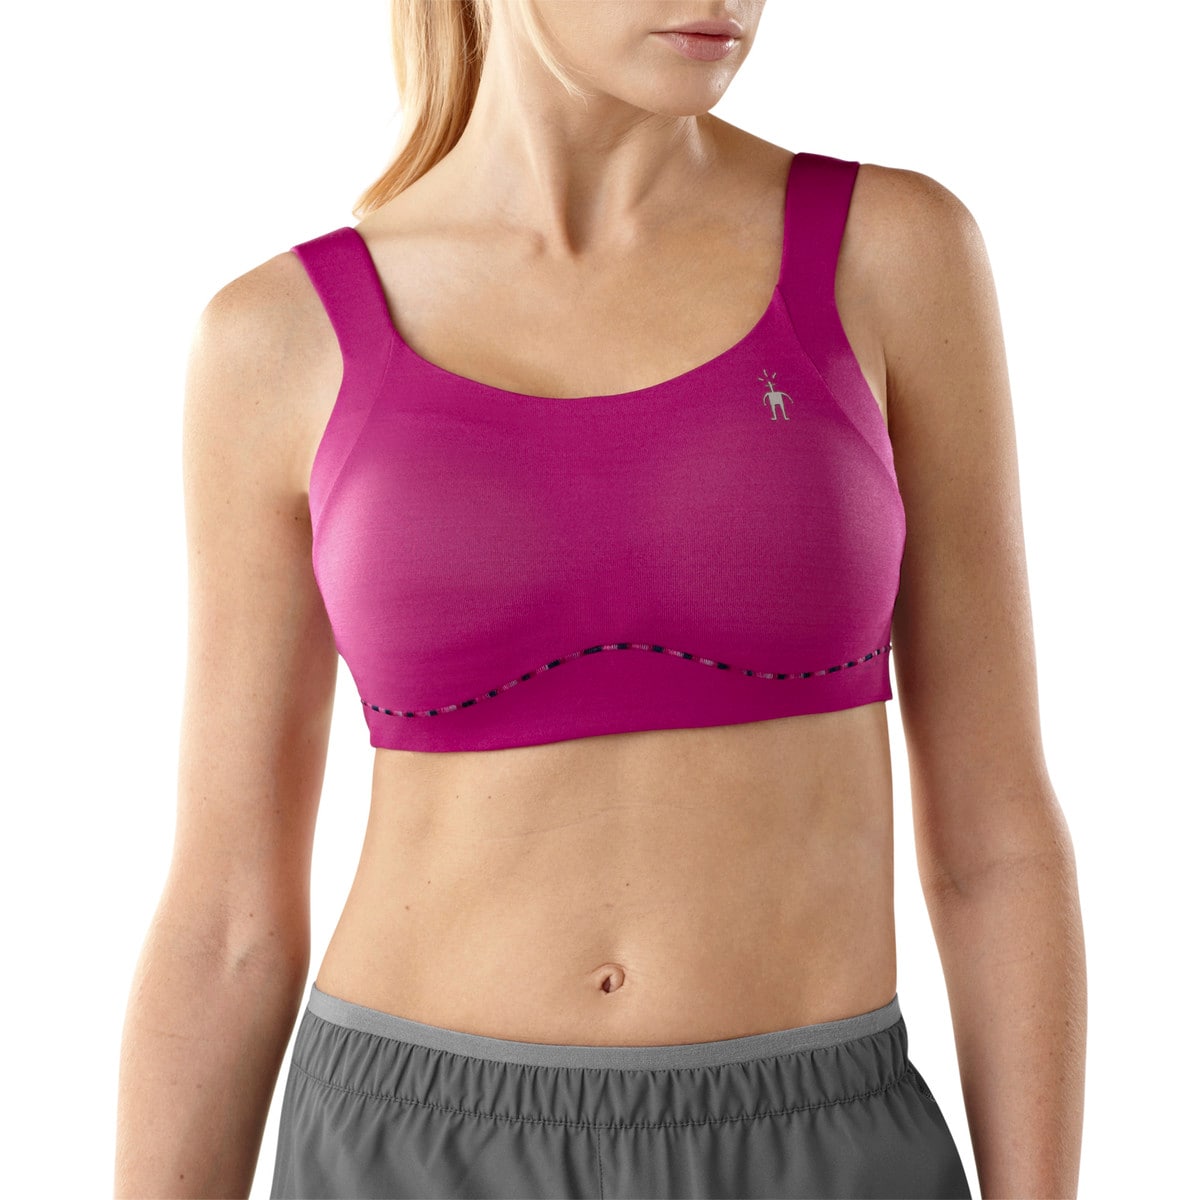 REVIEW: Smartwool PHD Support Bra